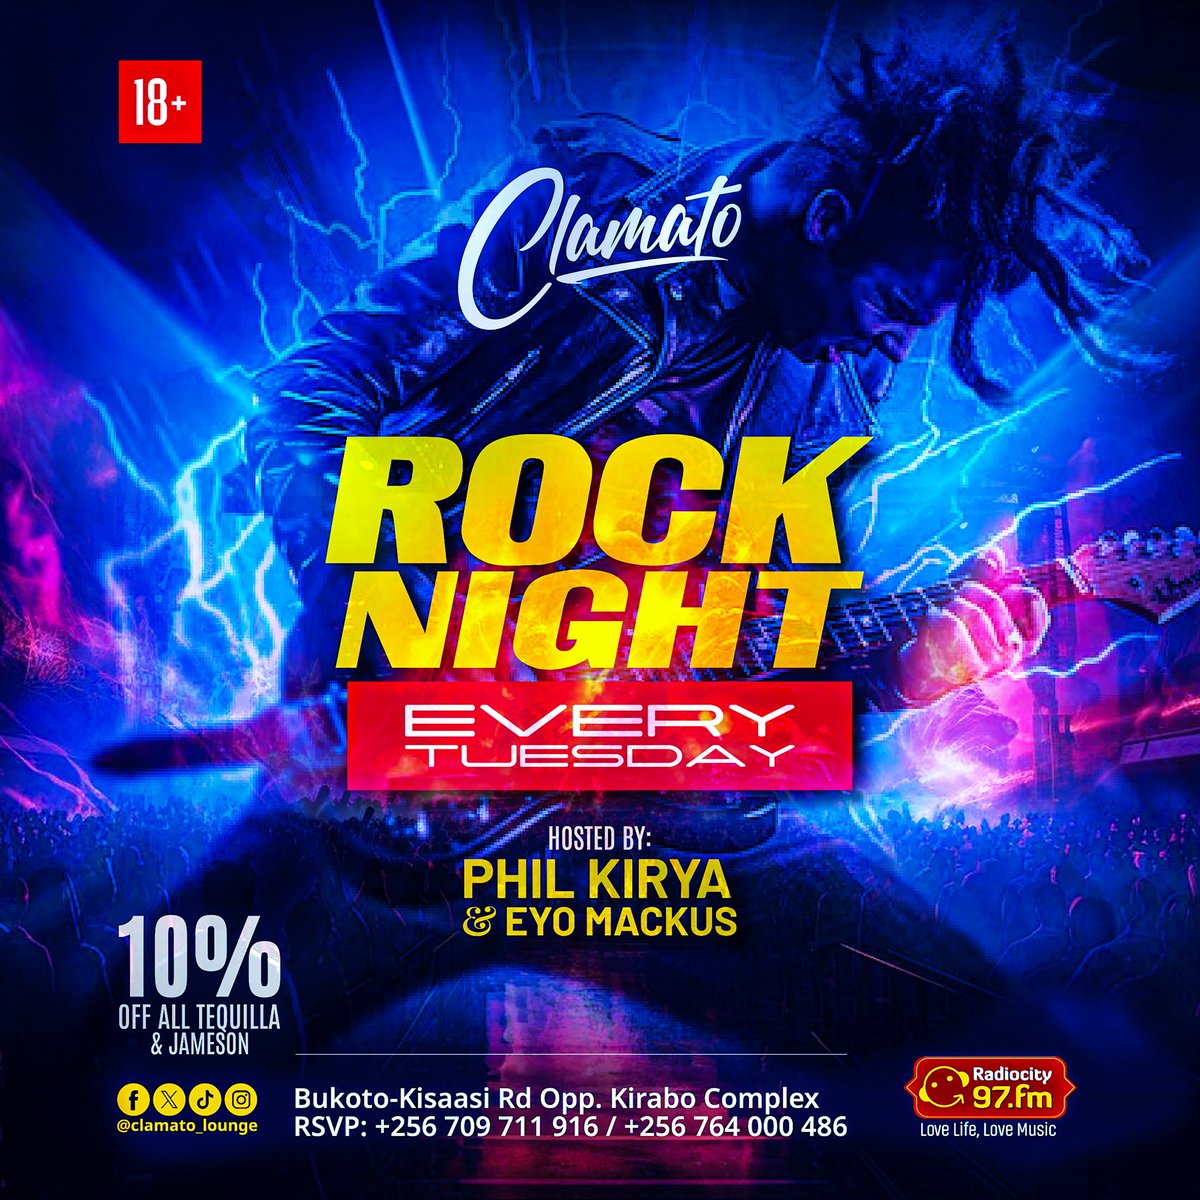 Rocknight @clamato_lounge tonight! 🎸 Get ready to rock out with delicious dishes, and a vibrant atmosphere. Whether you're a hardcore rocker or just looking for a fun night out, I and @PhilKirya gat you covered. Don't miss out on the ultimate rock experience! #EyoMackus